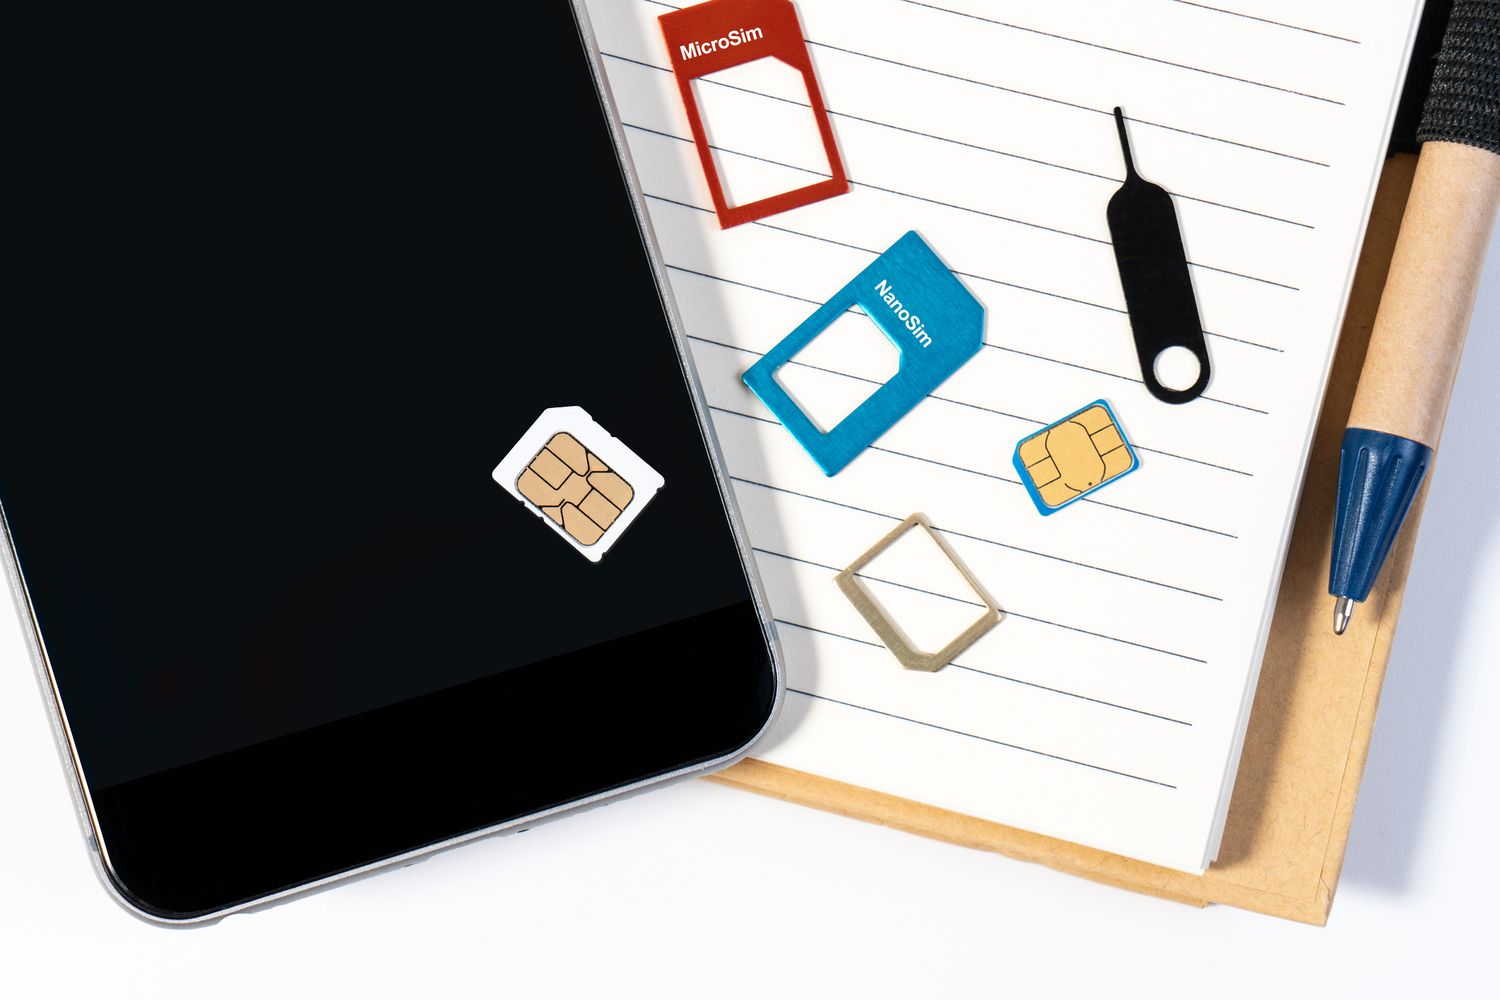 inserting-sim-card-into-iphone-7-a-step-by-step-guide